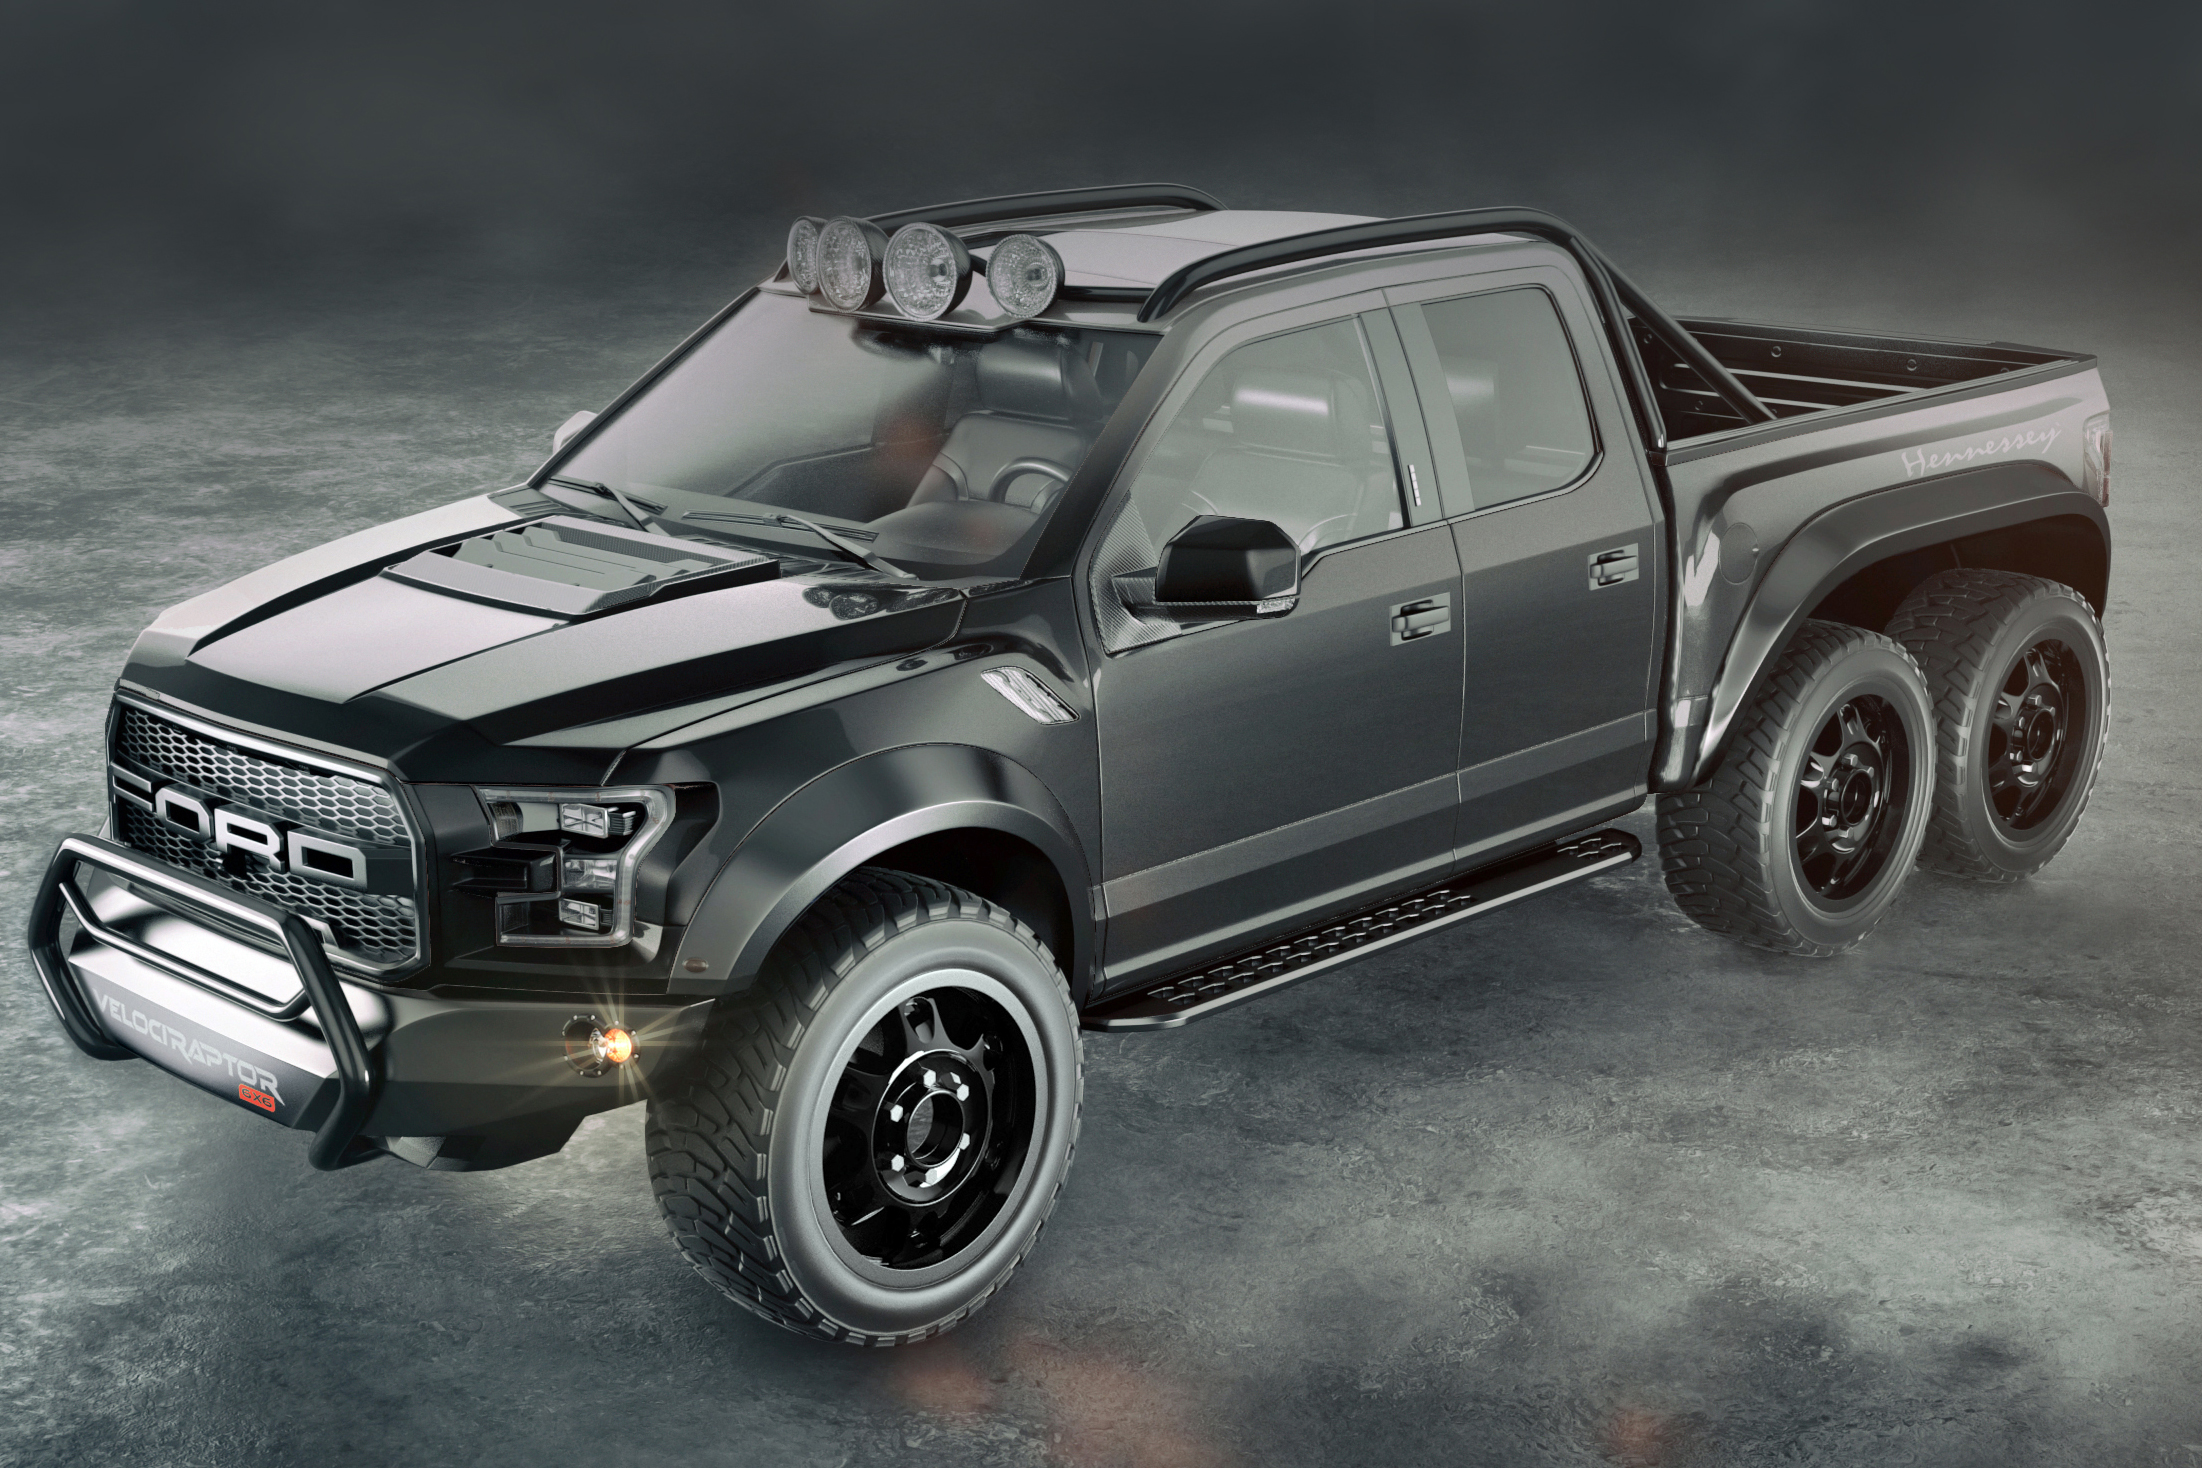 Ford Raptor wallpapers, Vehicles, HQ Ford Raptor pictures | 4K